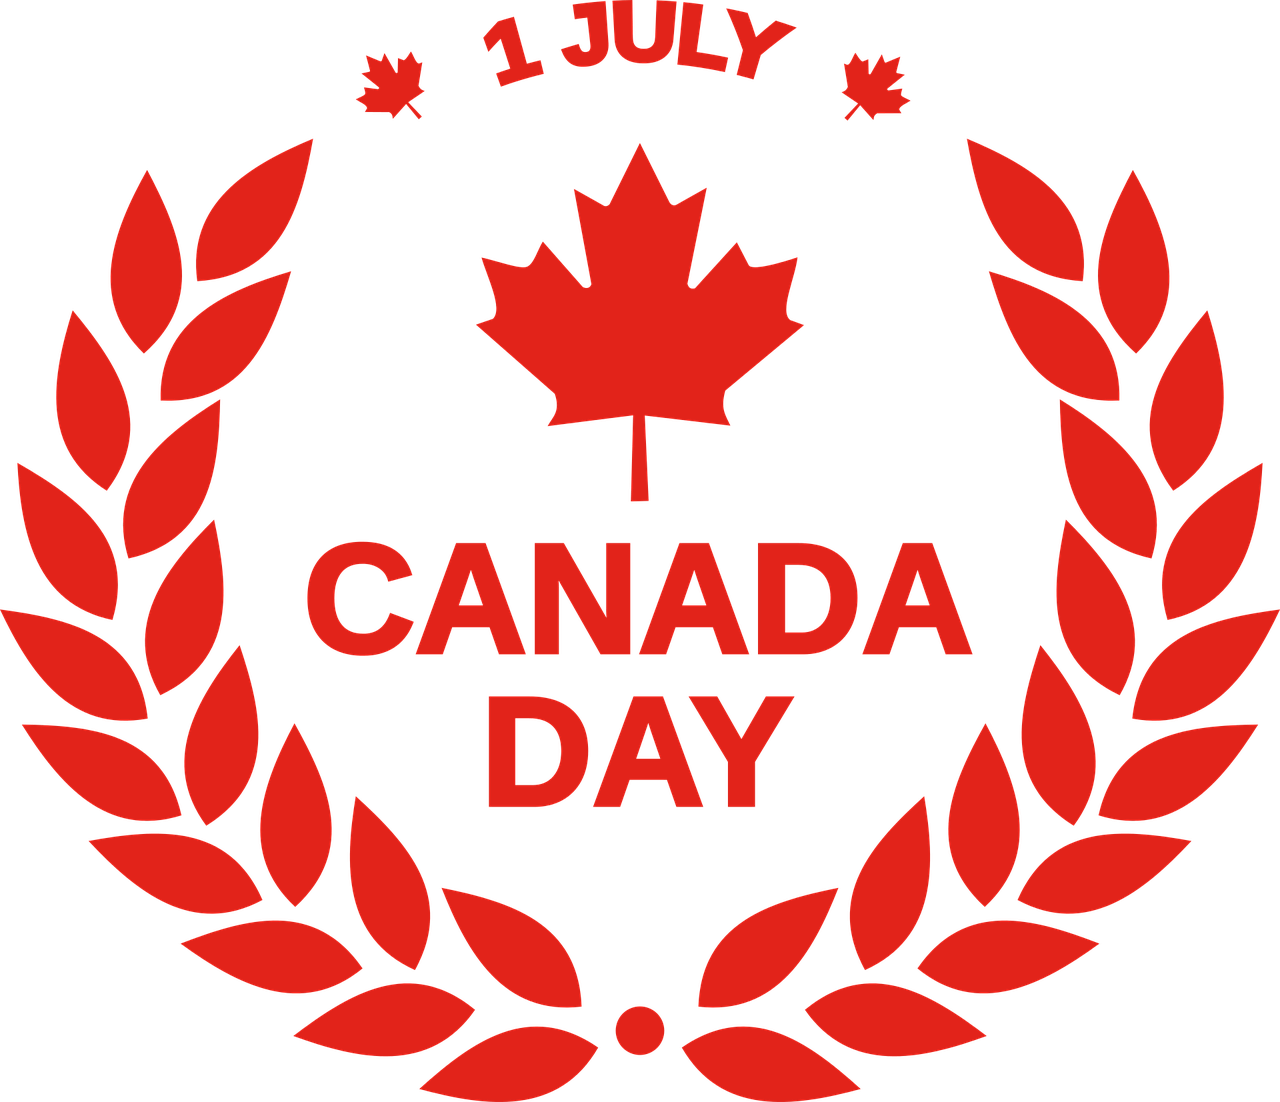 Happy Canada Day Wishes, Greetings Messages – July 1st Celebrate Canada Day